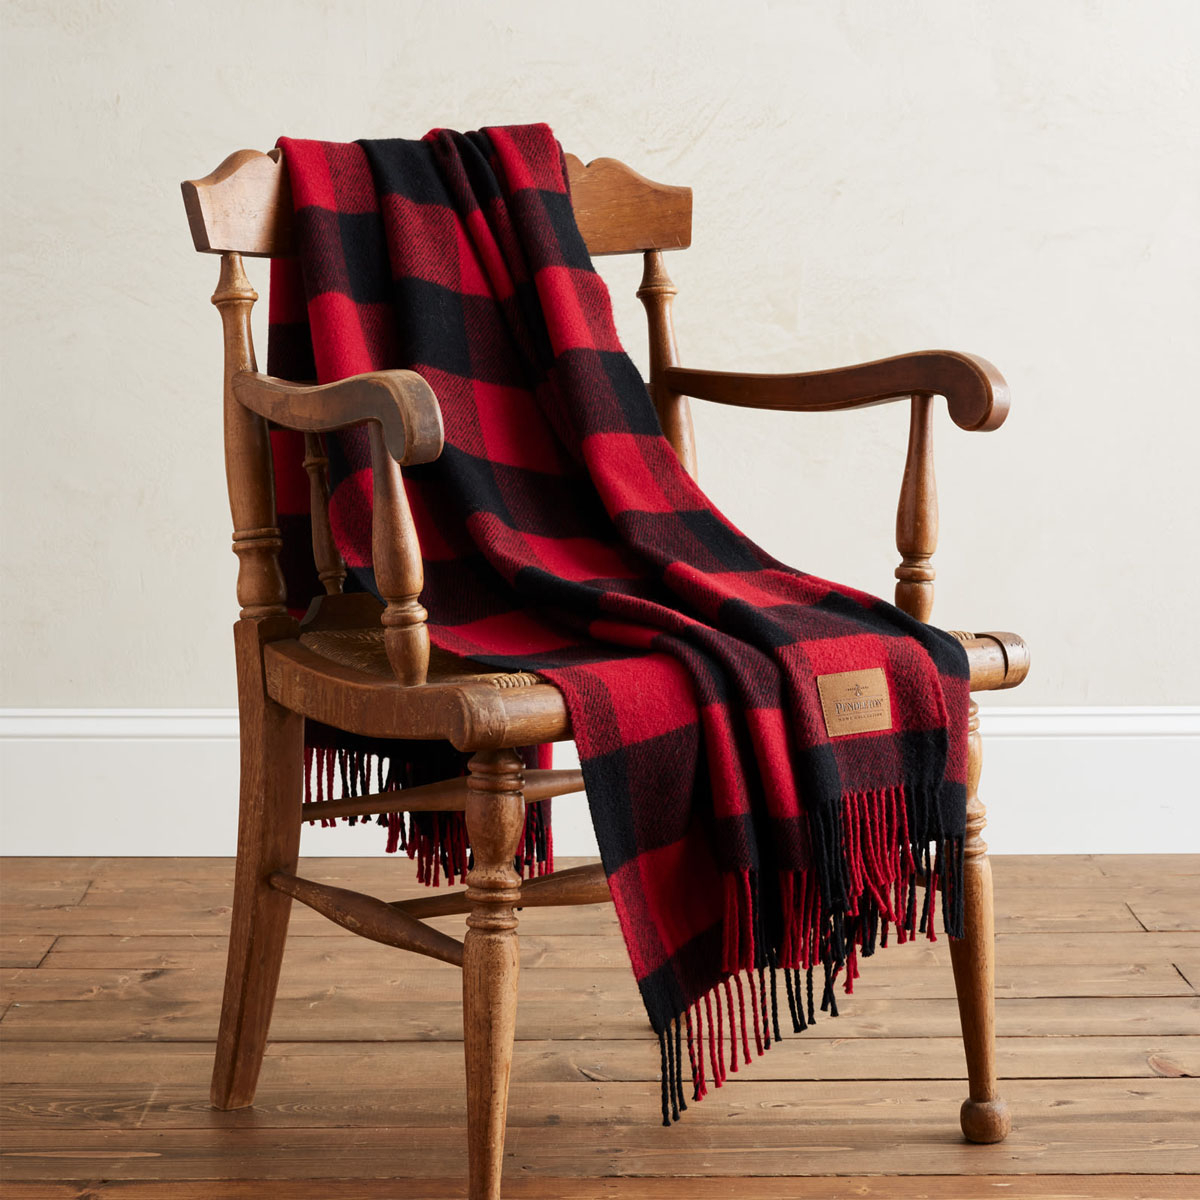 Pendleton Motor Robe with Leather Carrier Rob Roy Red, blanket perfect for picnics, camping or curling up indoors